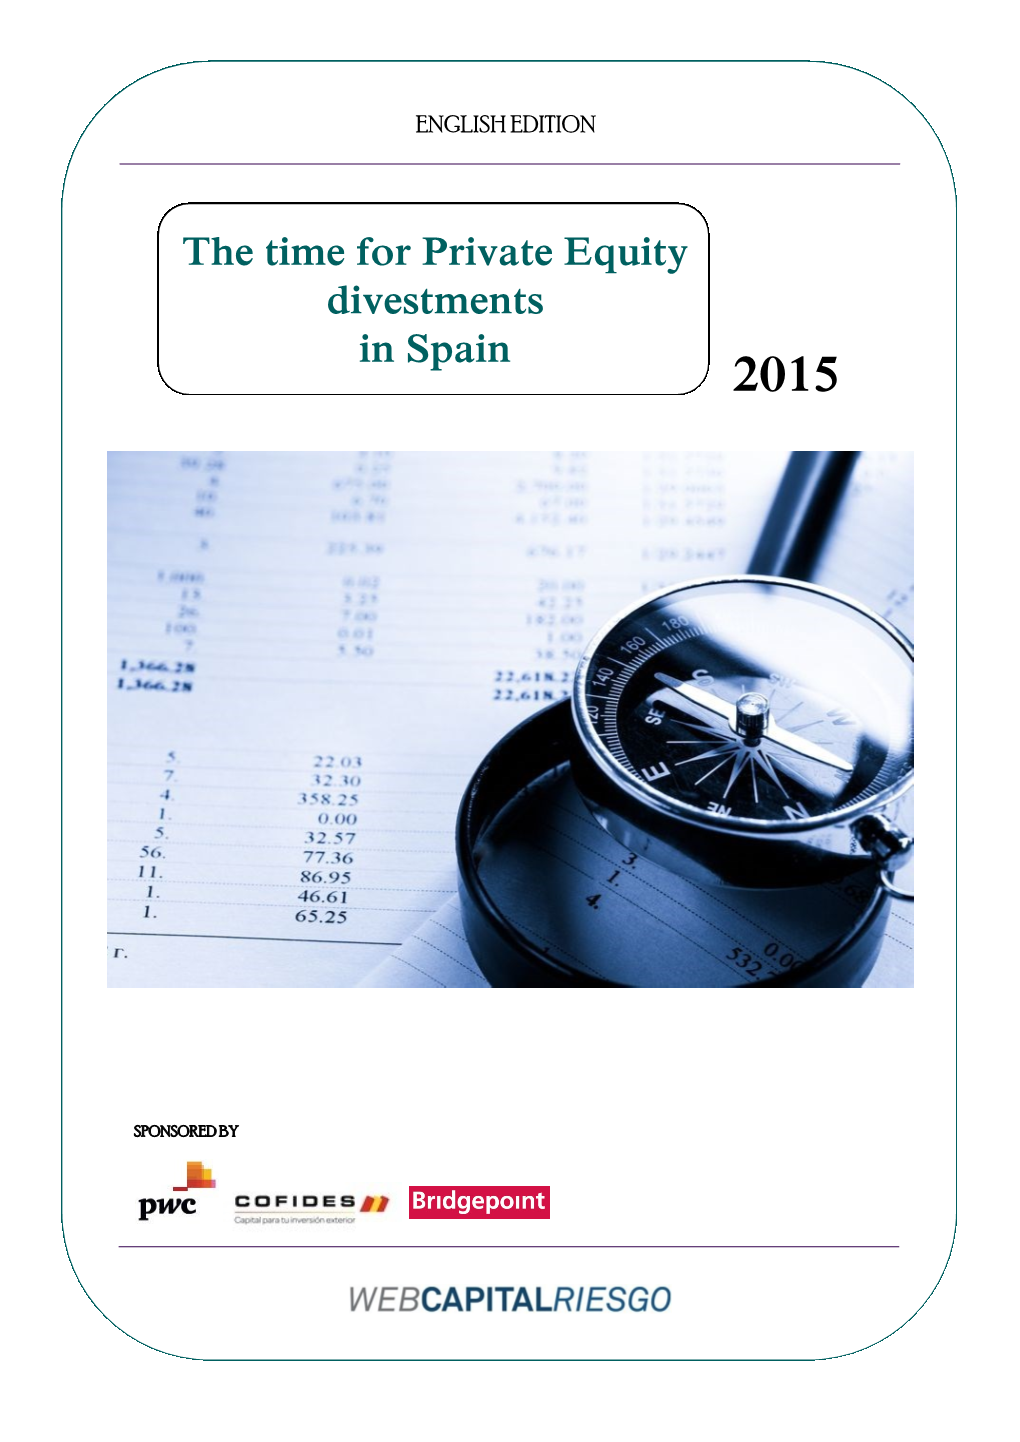 The Time for Private Equity Divestments in Spain 2015